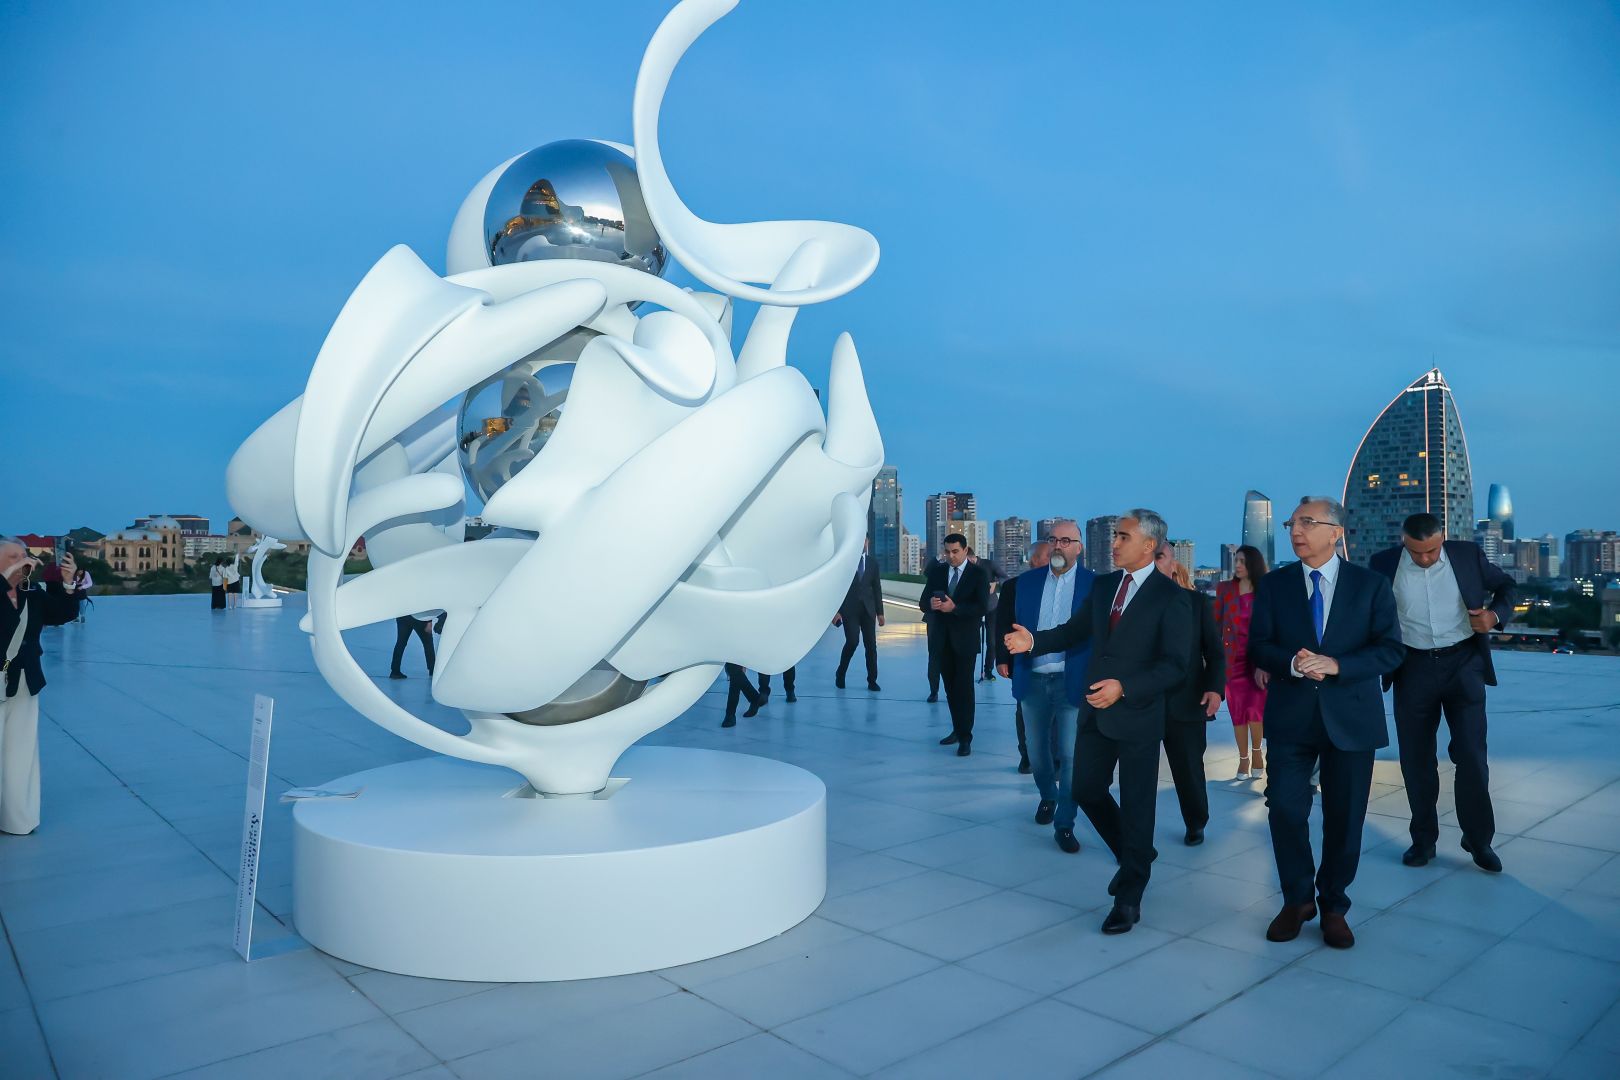 Exhibition "Lines of the Invisible" opened at Heydar Aliyev Center [PHOTOS/VIDEO]